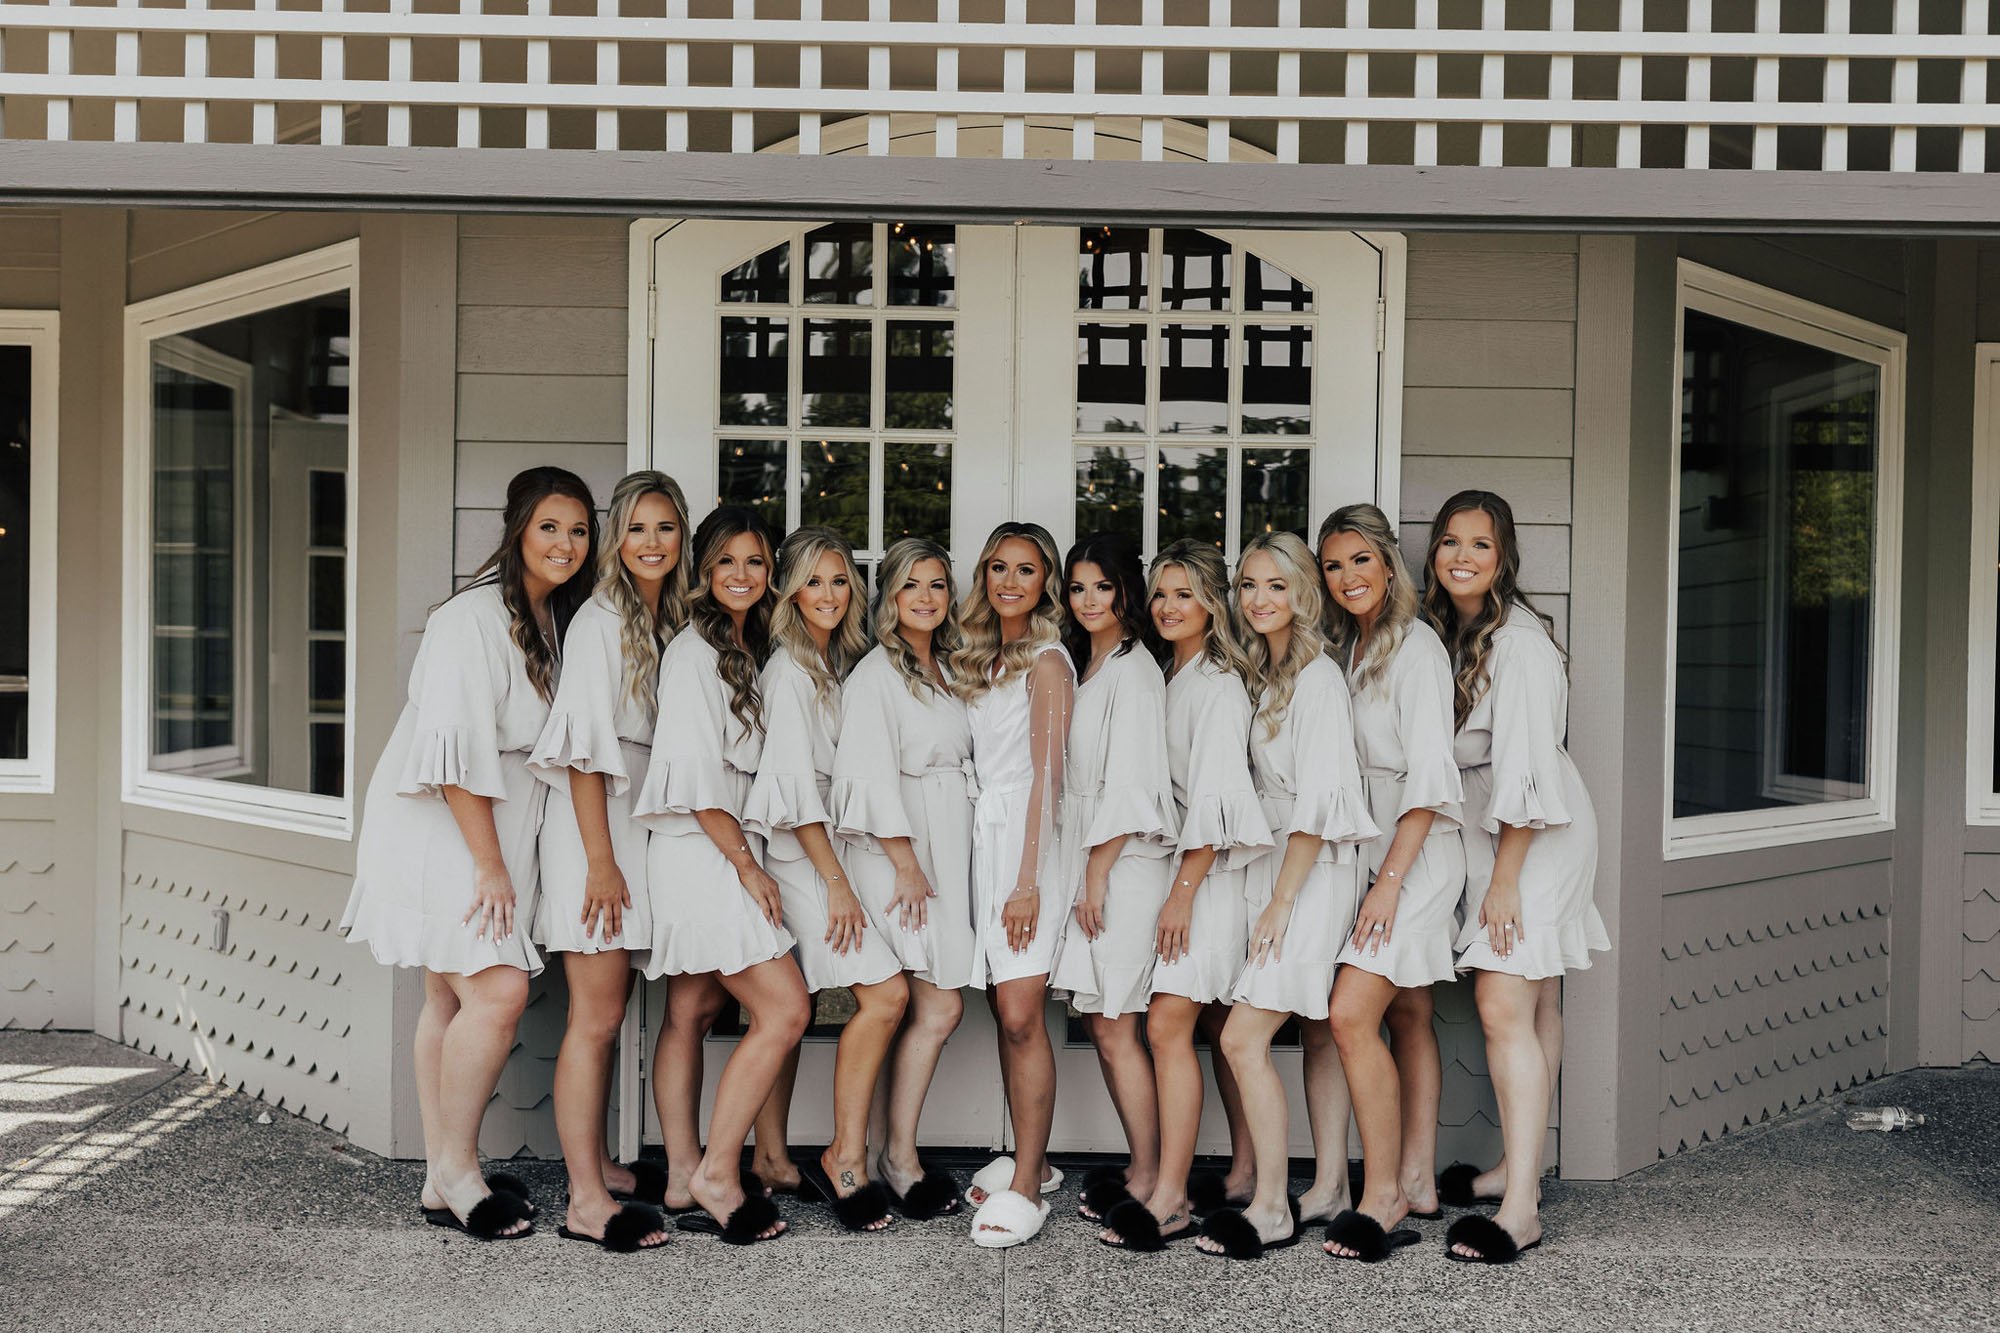  A photograph of a bridal party with ten bridesmaids. The bride is in the center of the group and they are all standing under an awning in front of large glass double doors. They are wearing short ruffle robes and fuzzy slippers as they get ready for